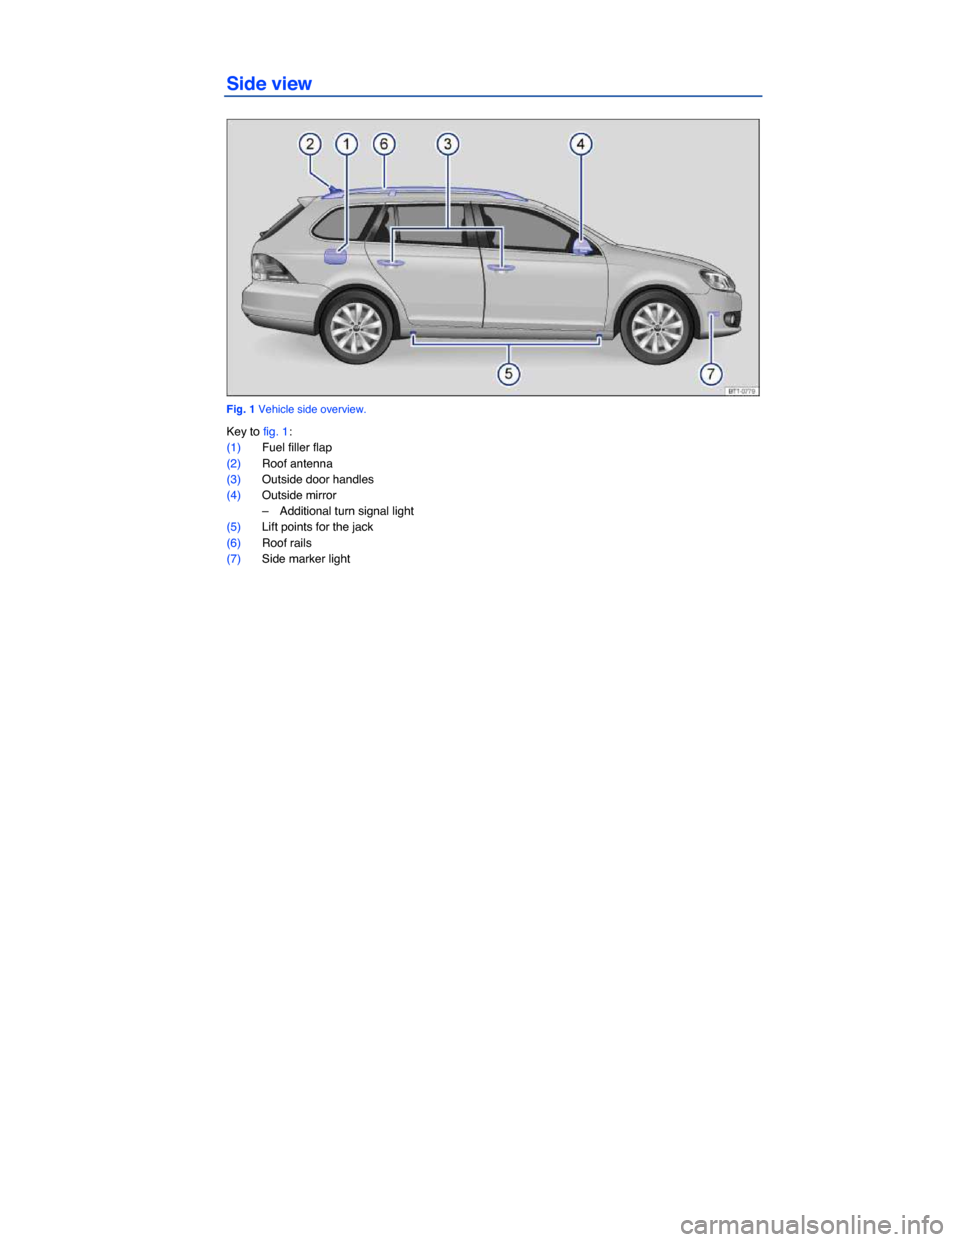 VOLKSWAGEN JETTA SPORTWAGEN 2014 1B / 6.G Owners Manual  
Side view 
 
Fig. 1 Vehicle side overview. 
Key to fig. 1: 
(1) Fuel filler flap  
(2) Roof antenna  
(3) Outside door handles  
(4) Outside mirror  
–  Additional turn signal light  
(5) Lift poi